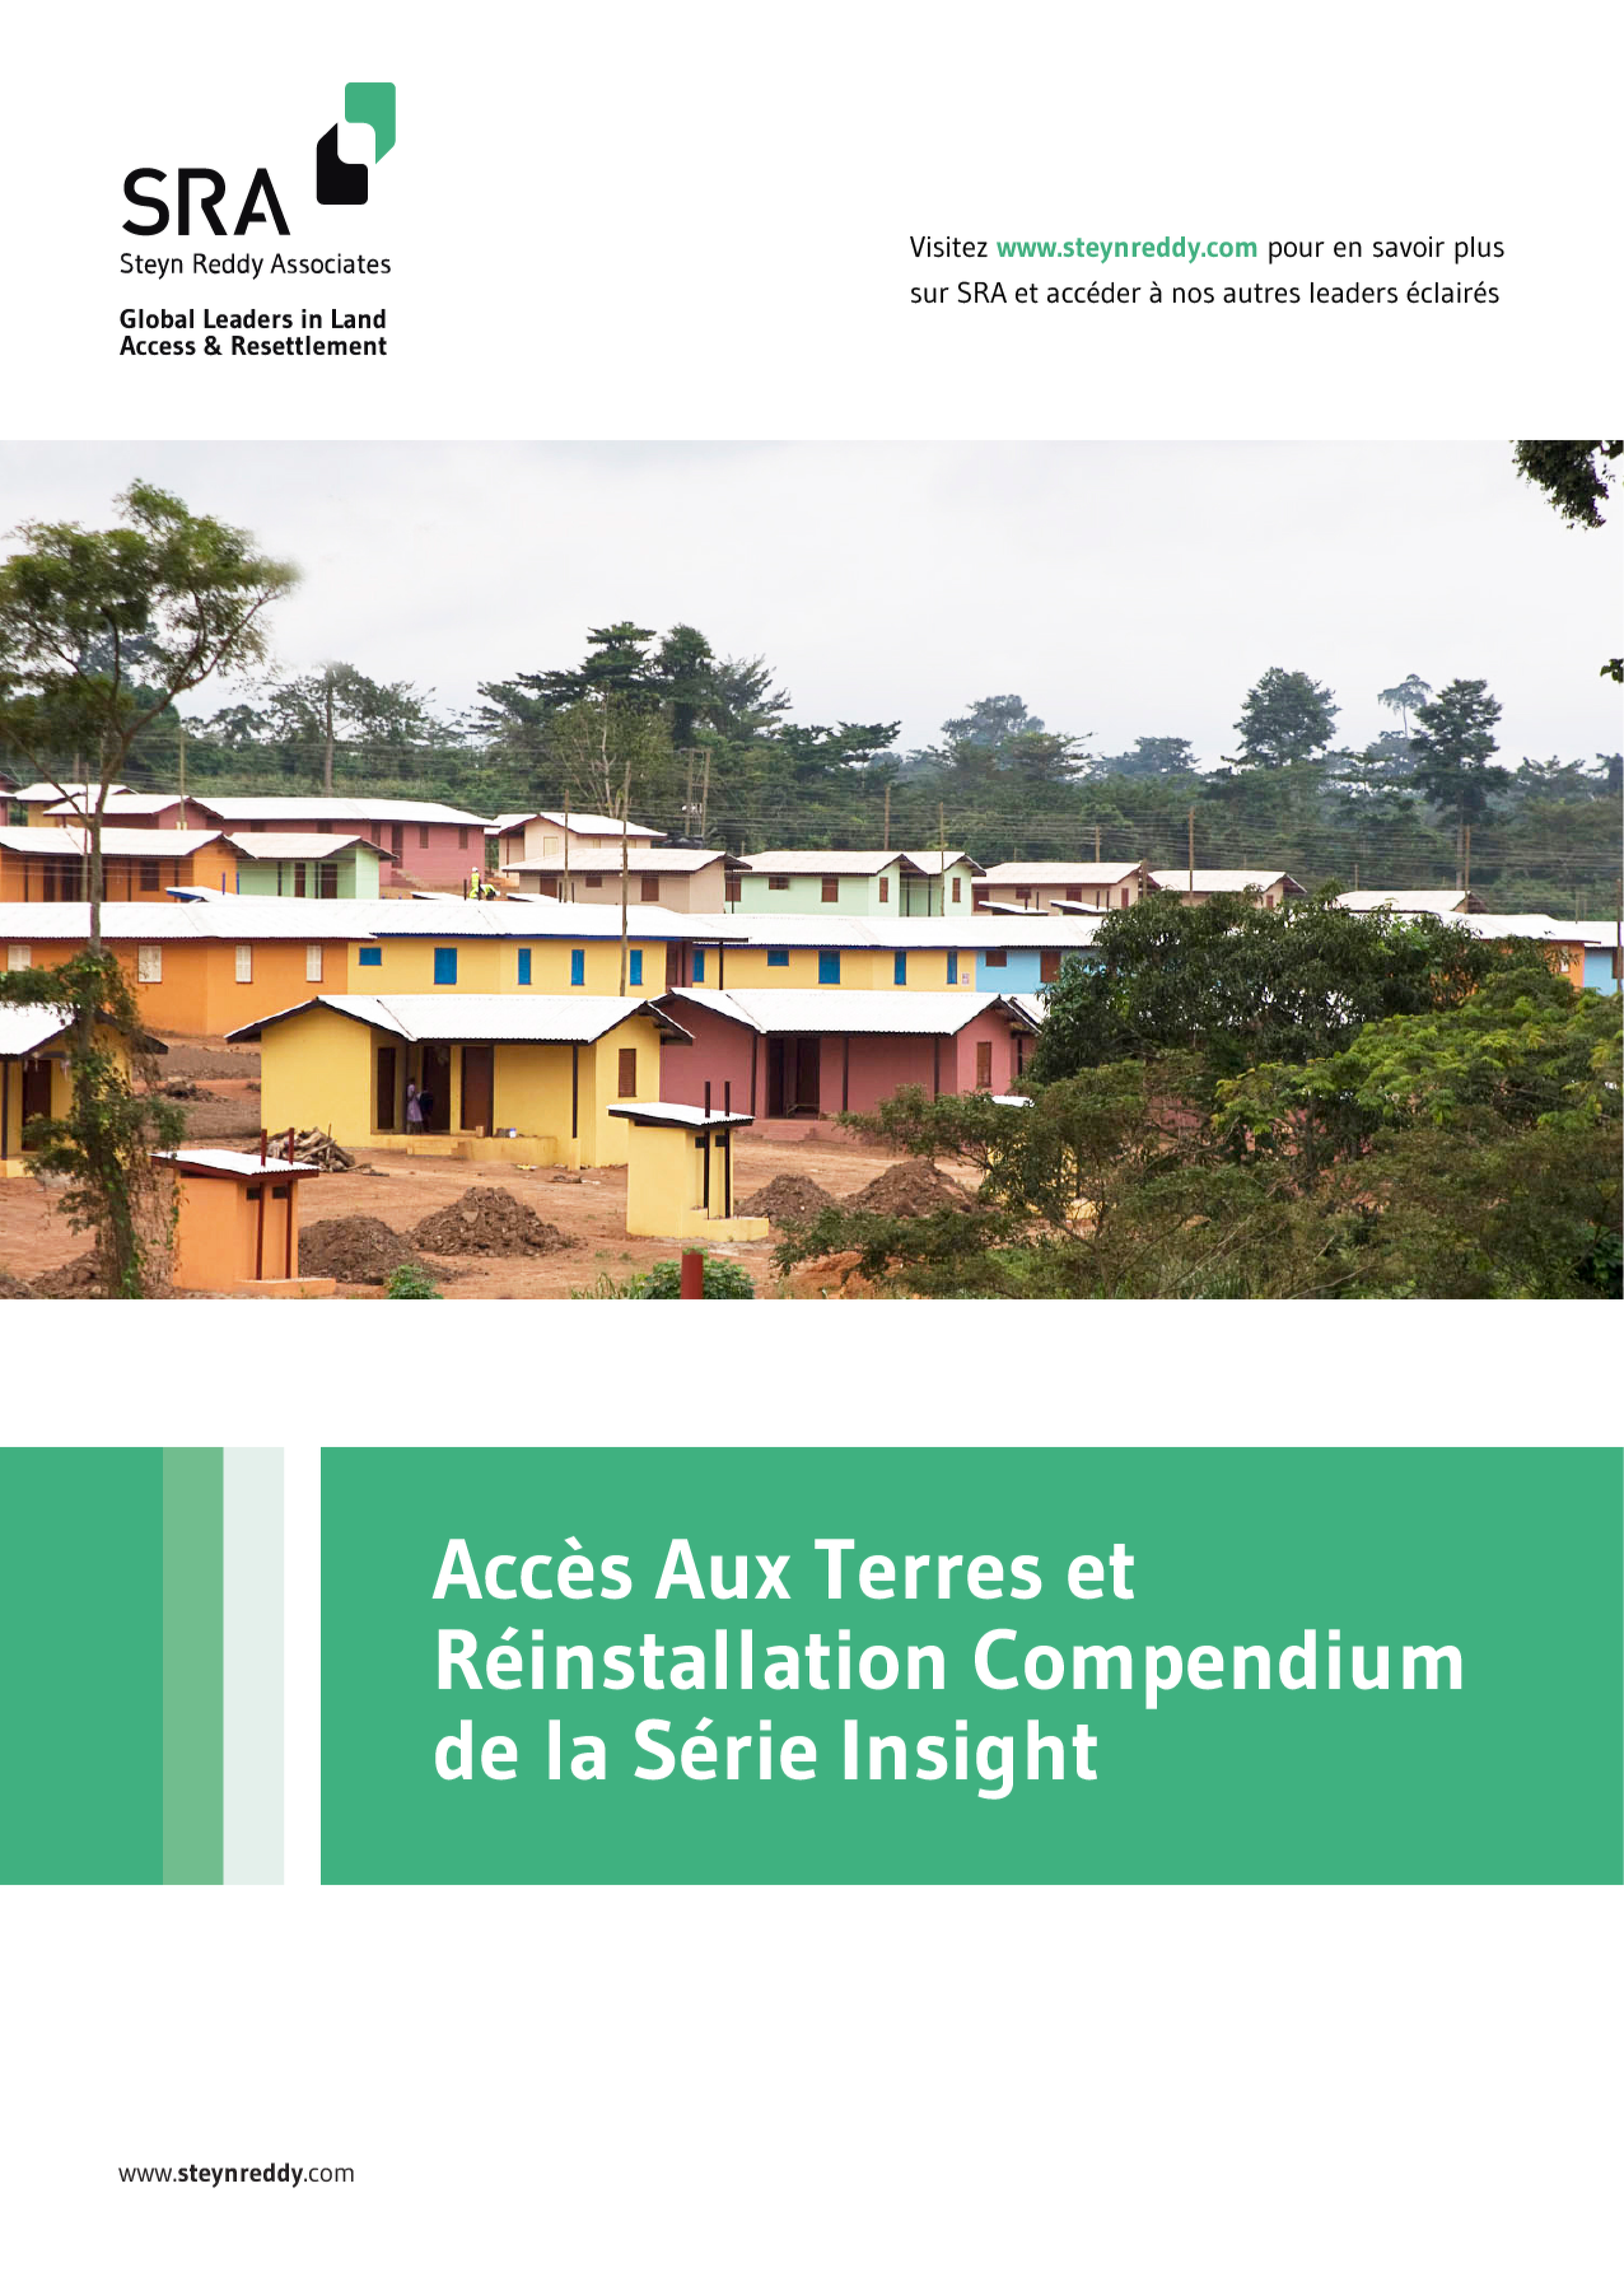 SRA-Land-Access-And-Resettlement-Compendium-FRENCH-Cover-01